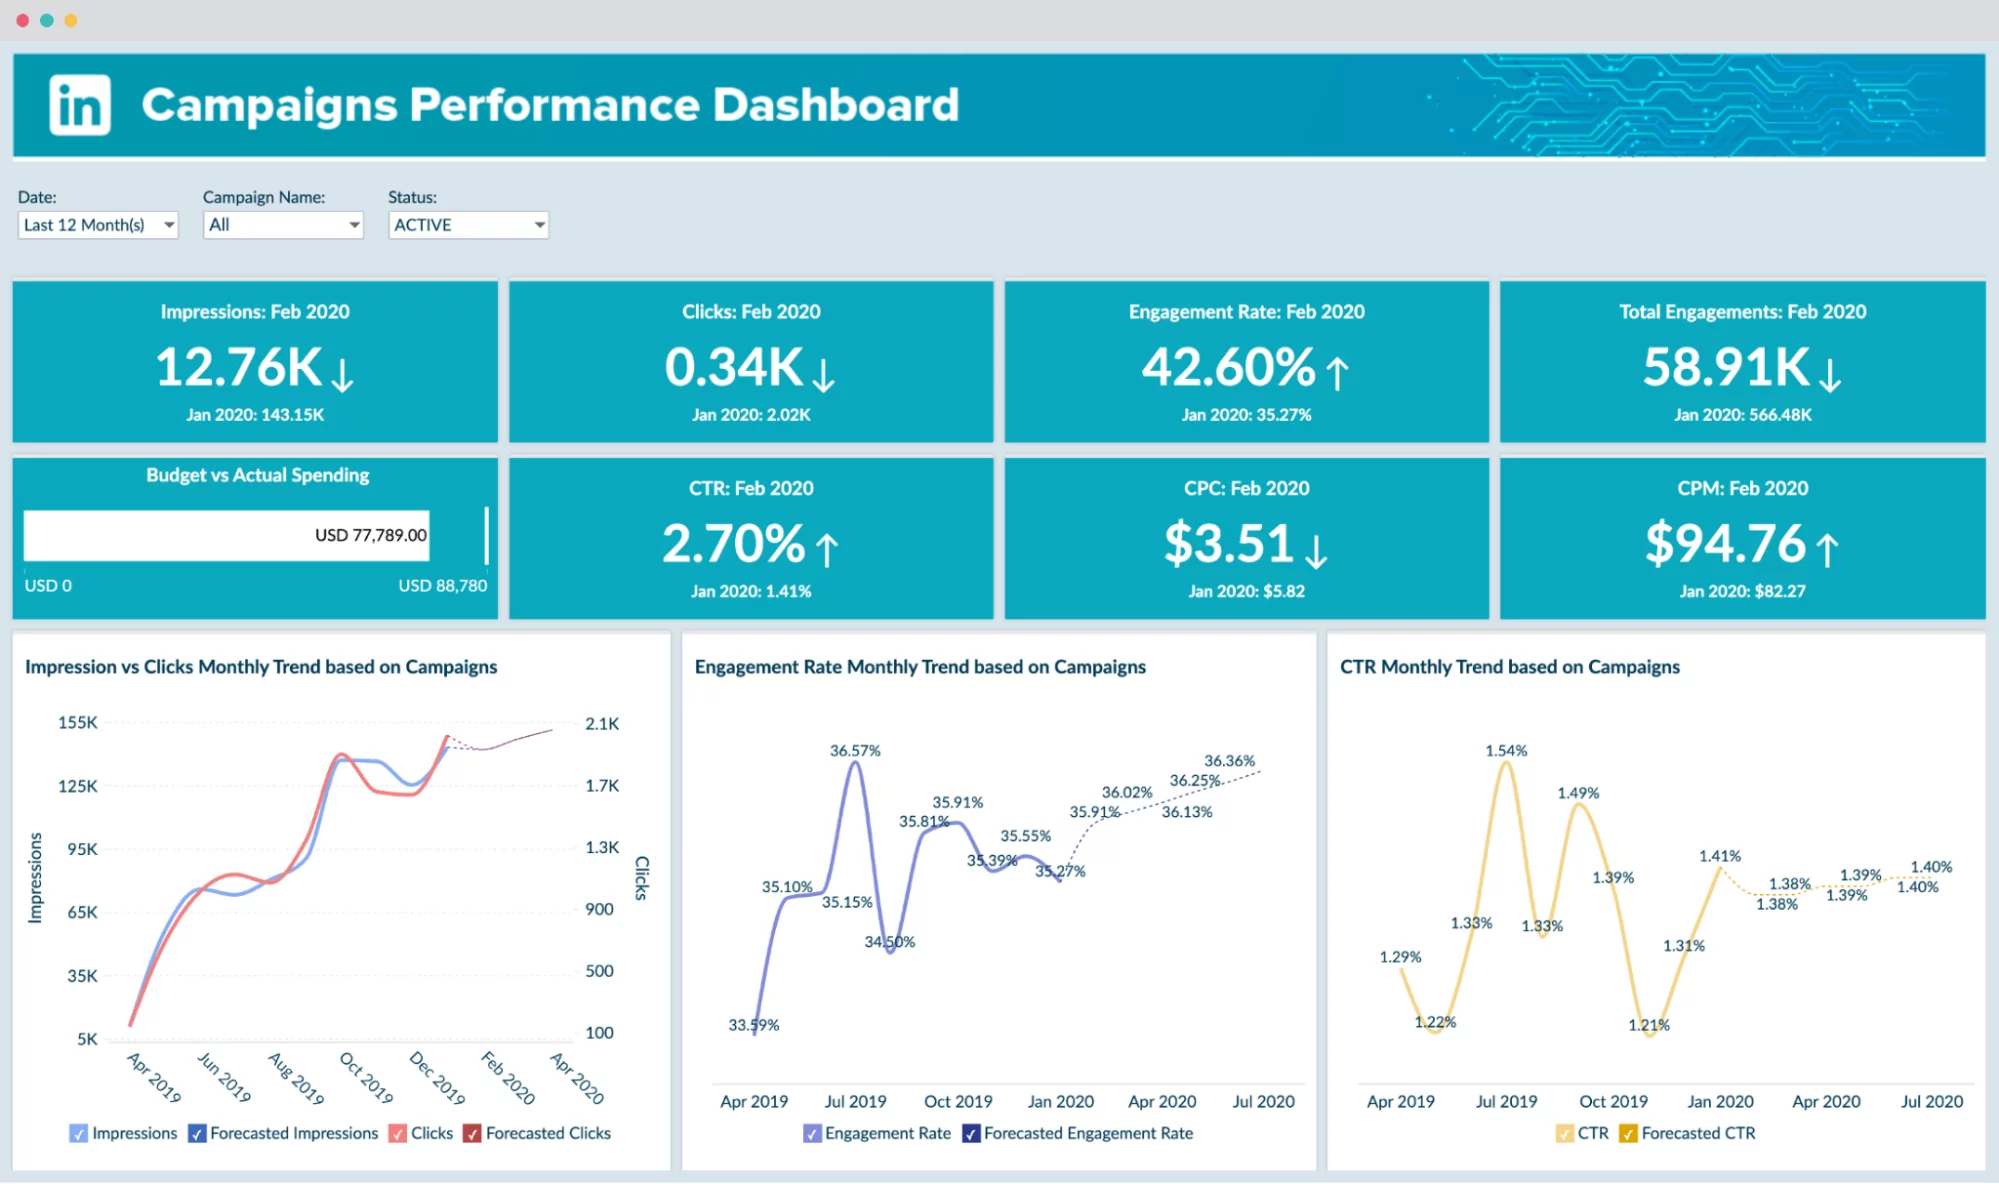 Zoho campaigns performance dashboard with multiple statistics such as impressions trend, engagement rate, and CTR monthly rate.